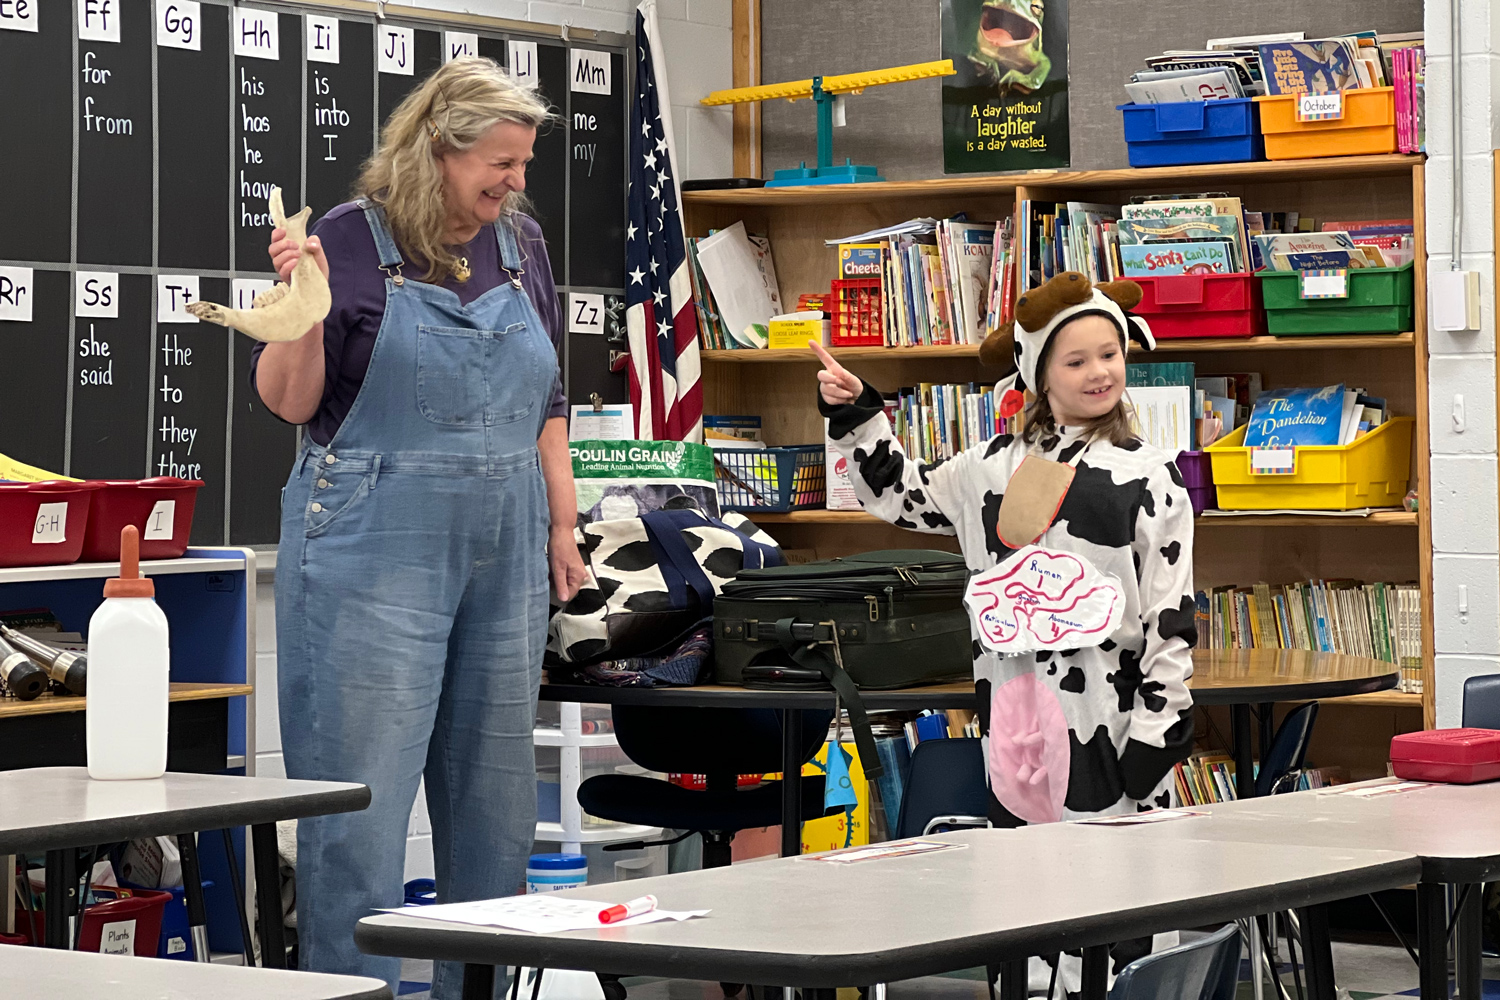 Educator Virginia Holiman visits a Vermont classroom to teach kids about dairy farming and prepare students for visiting a local farm. Here, they're using our "Dress Up a Cow" activity to understand a cow's anatomy.